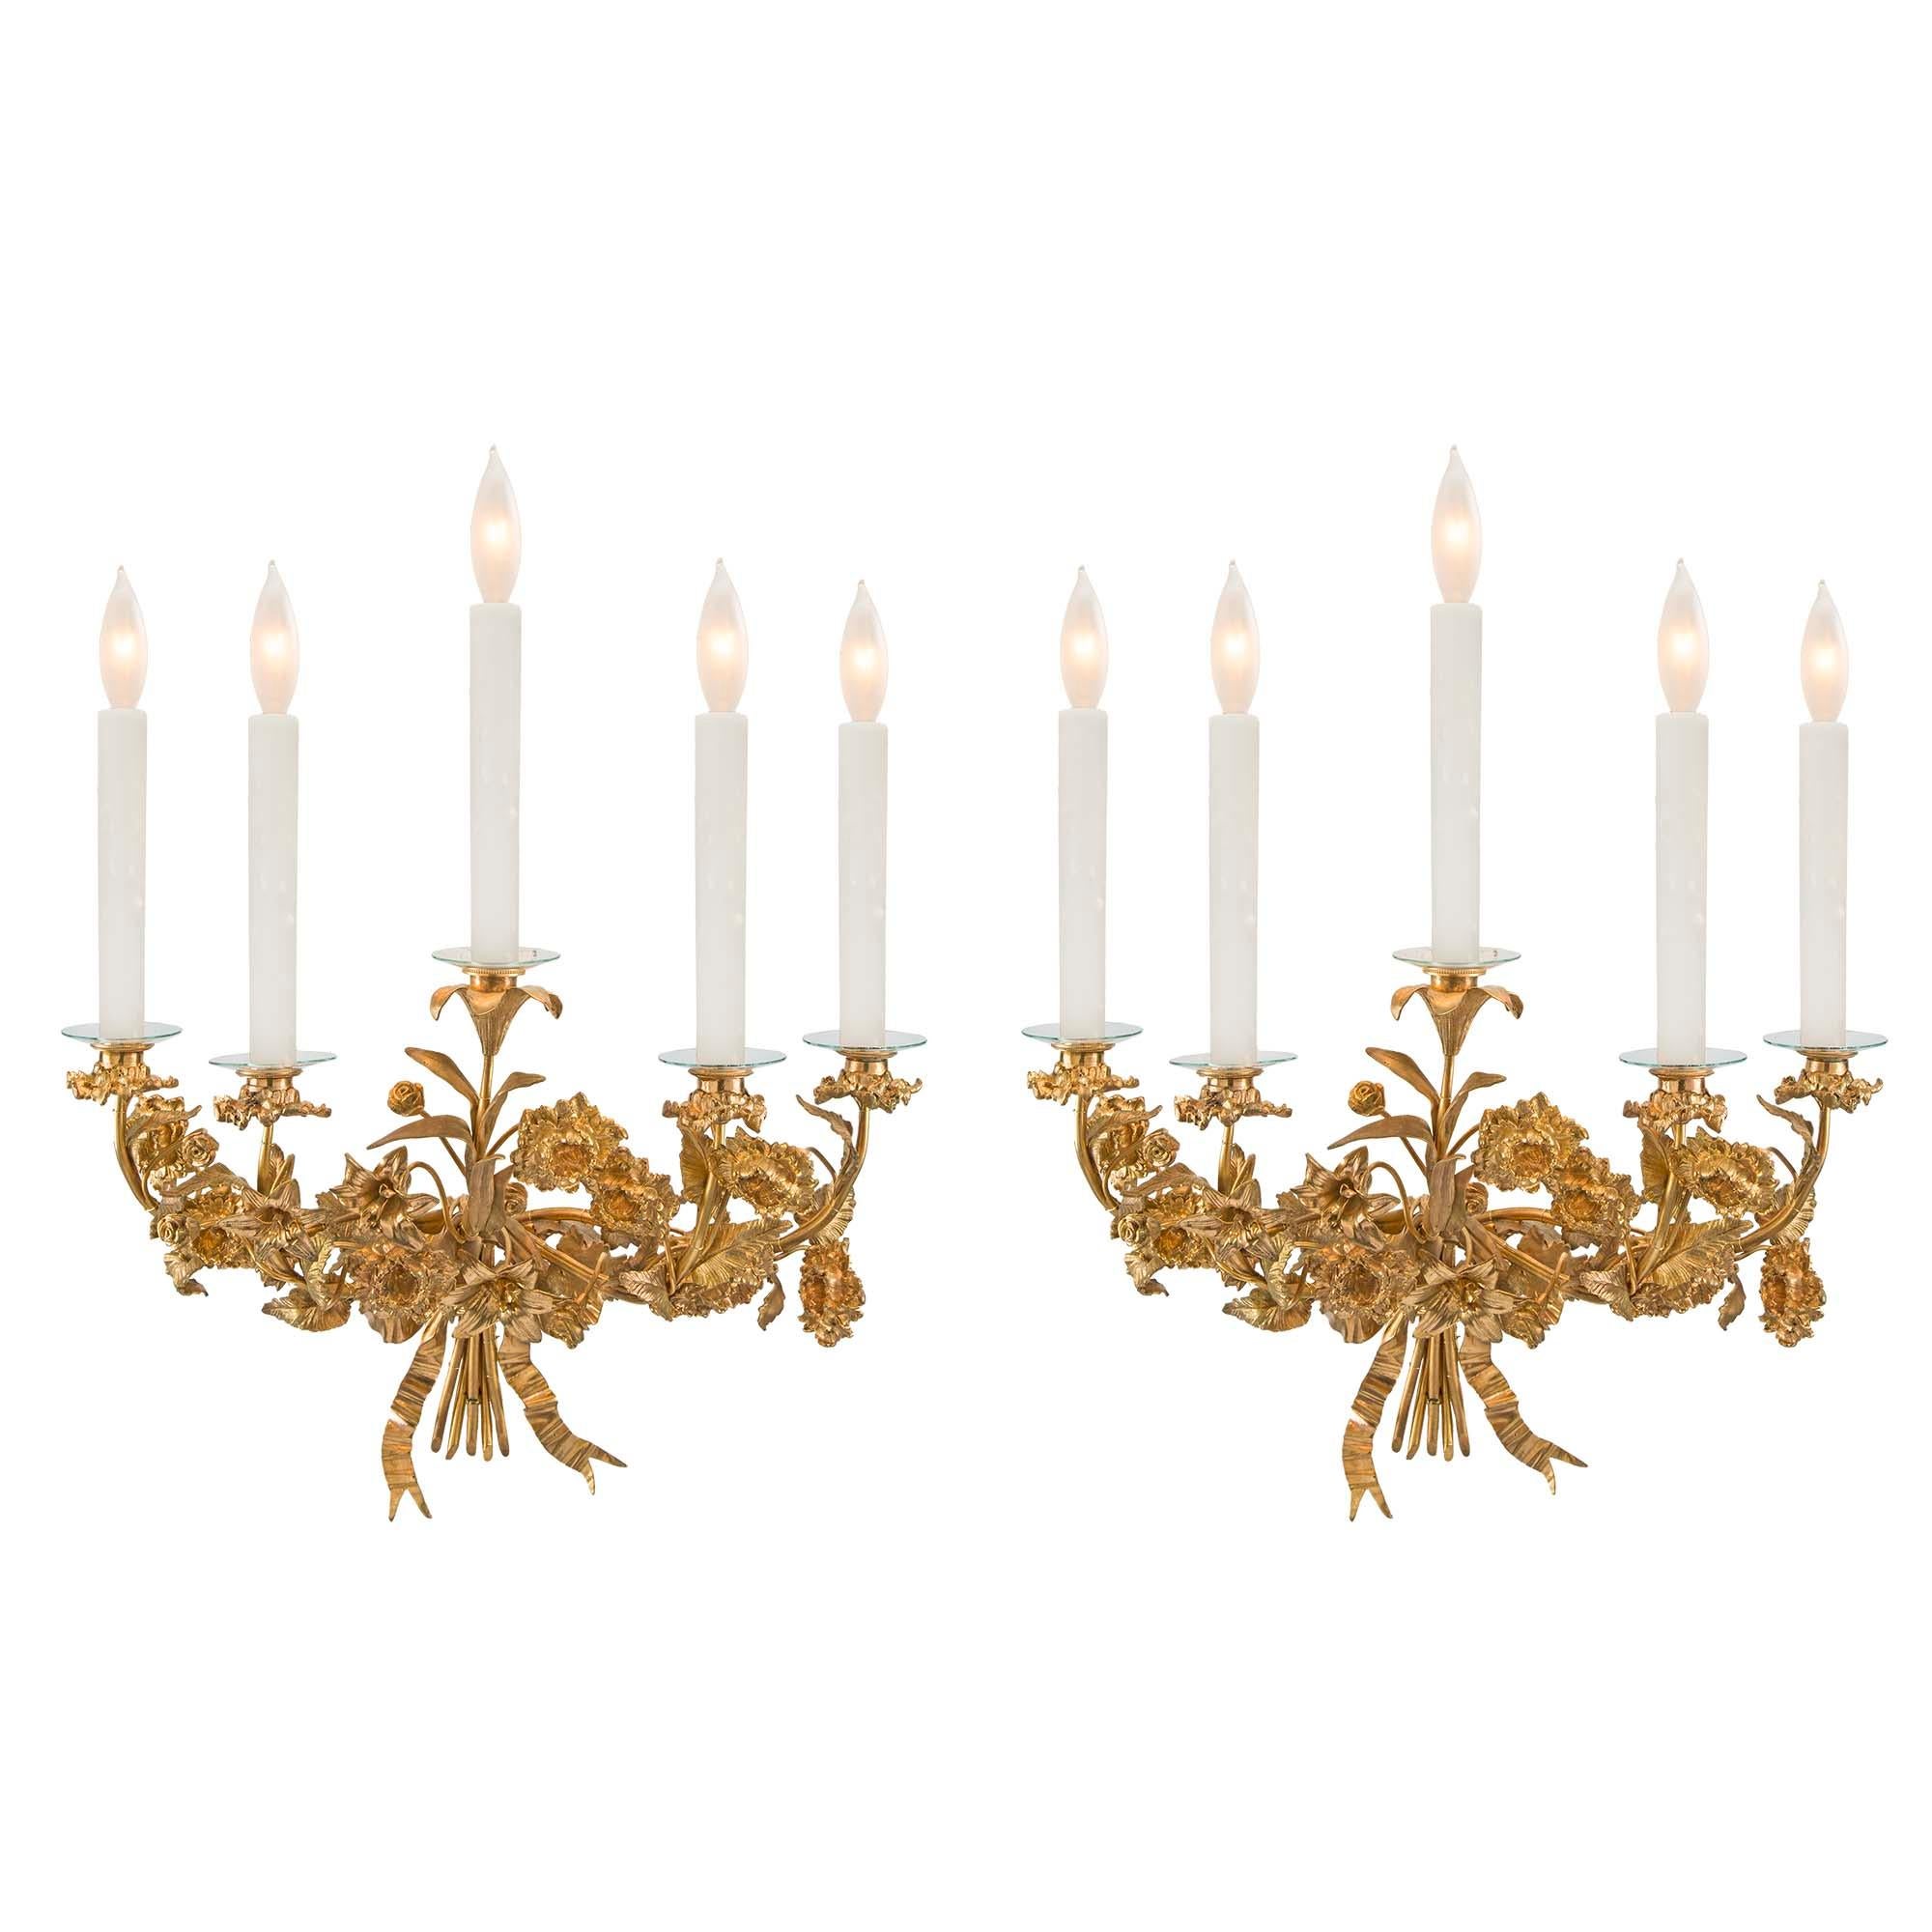 A beautiful and very decorative pair of French 19th century Louis XVI style ormolu sconces. Each five light sconce is in a fanciful shape of a bouquet of flowers. Centered by stems tied by a bow. The arms are adorned with finely chased flower